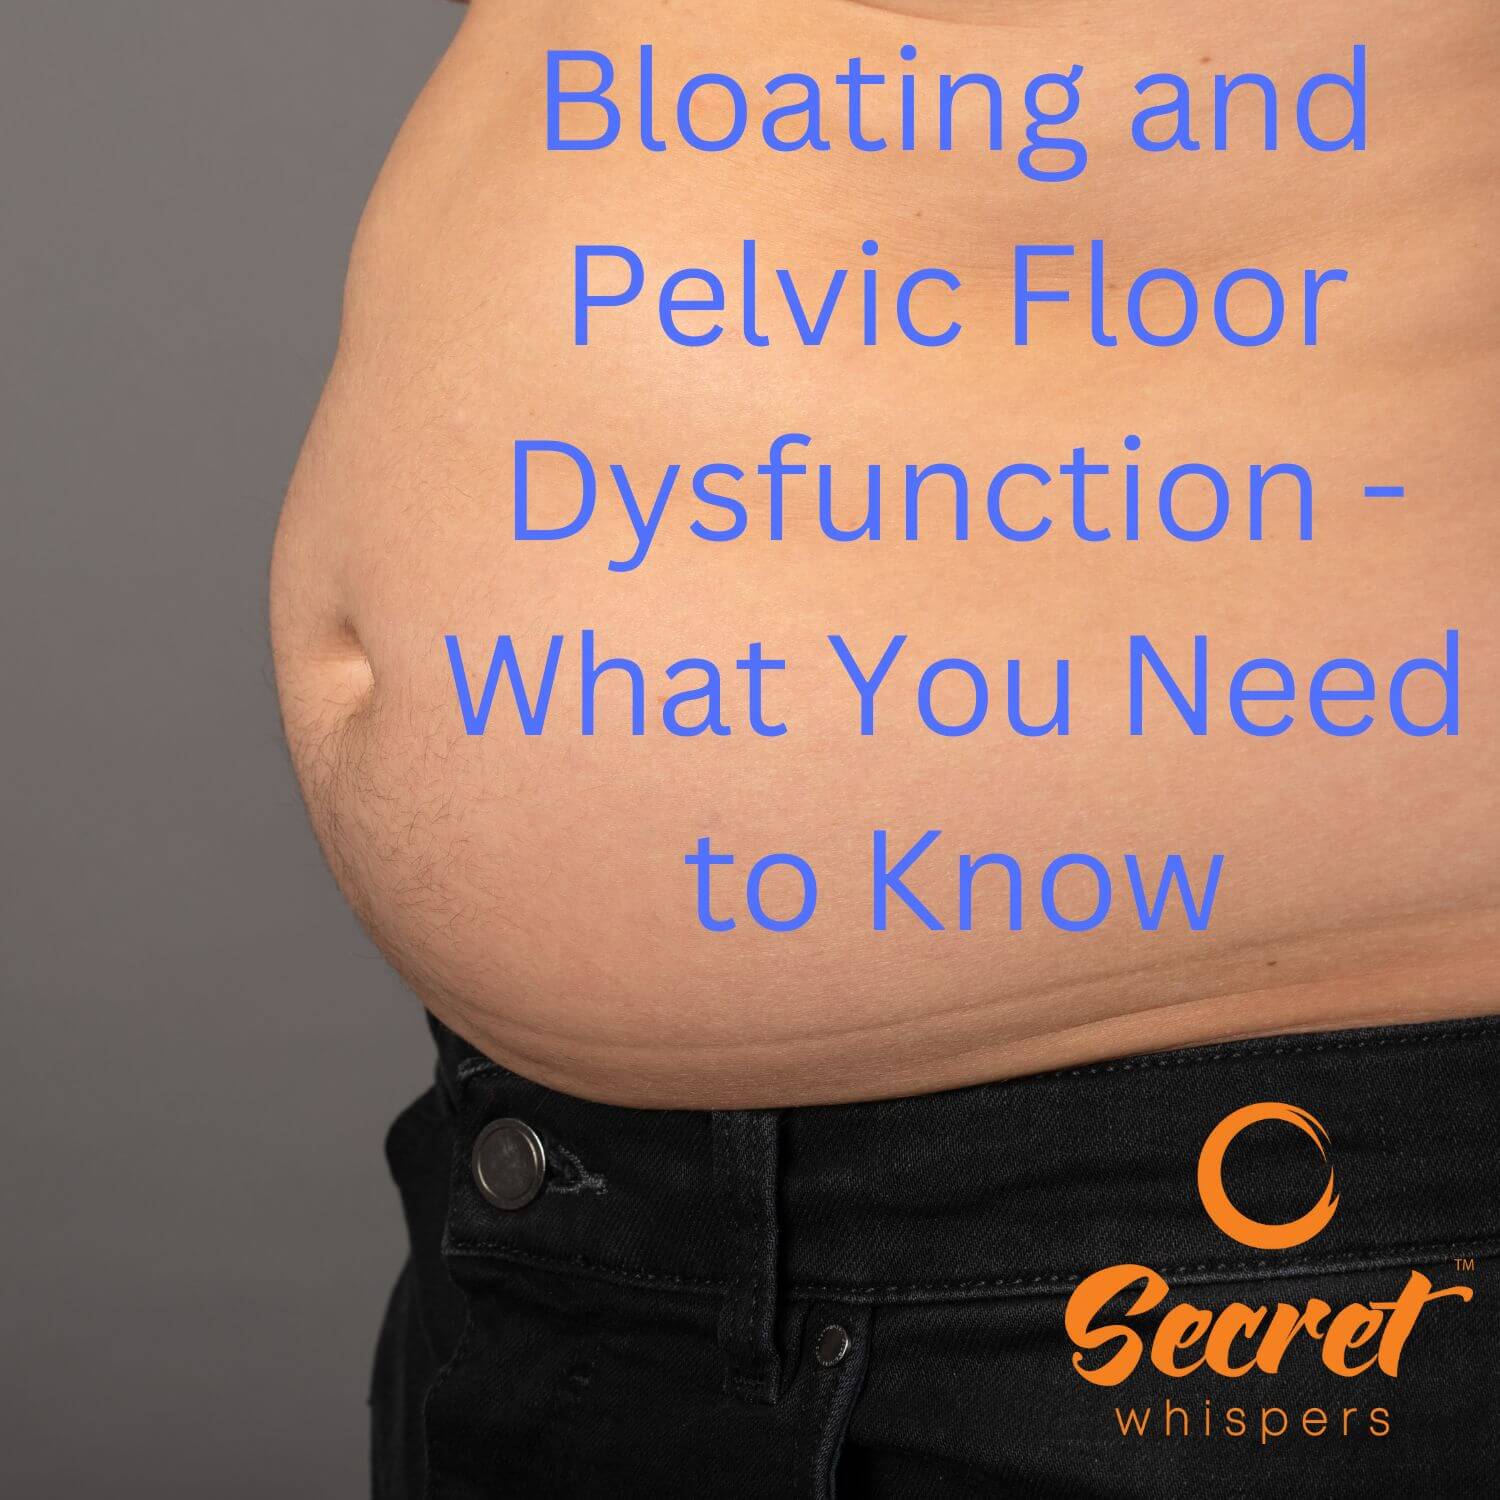 Bloating and Pelvic Floor Dysfunction